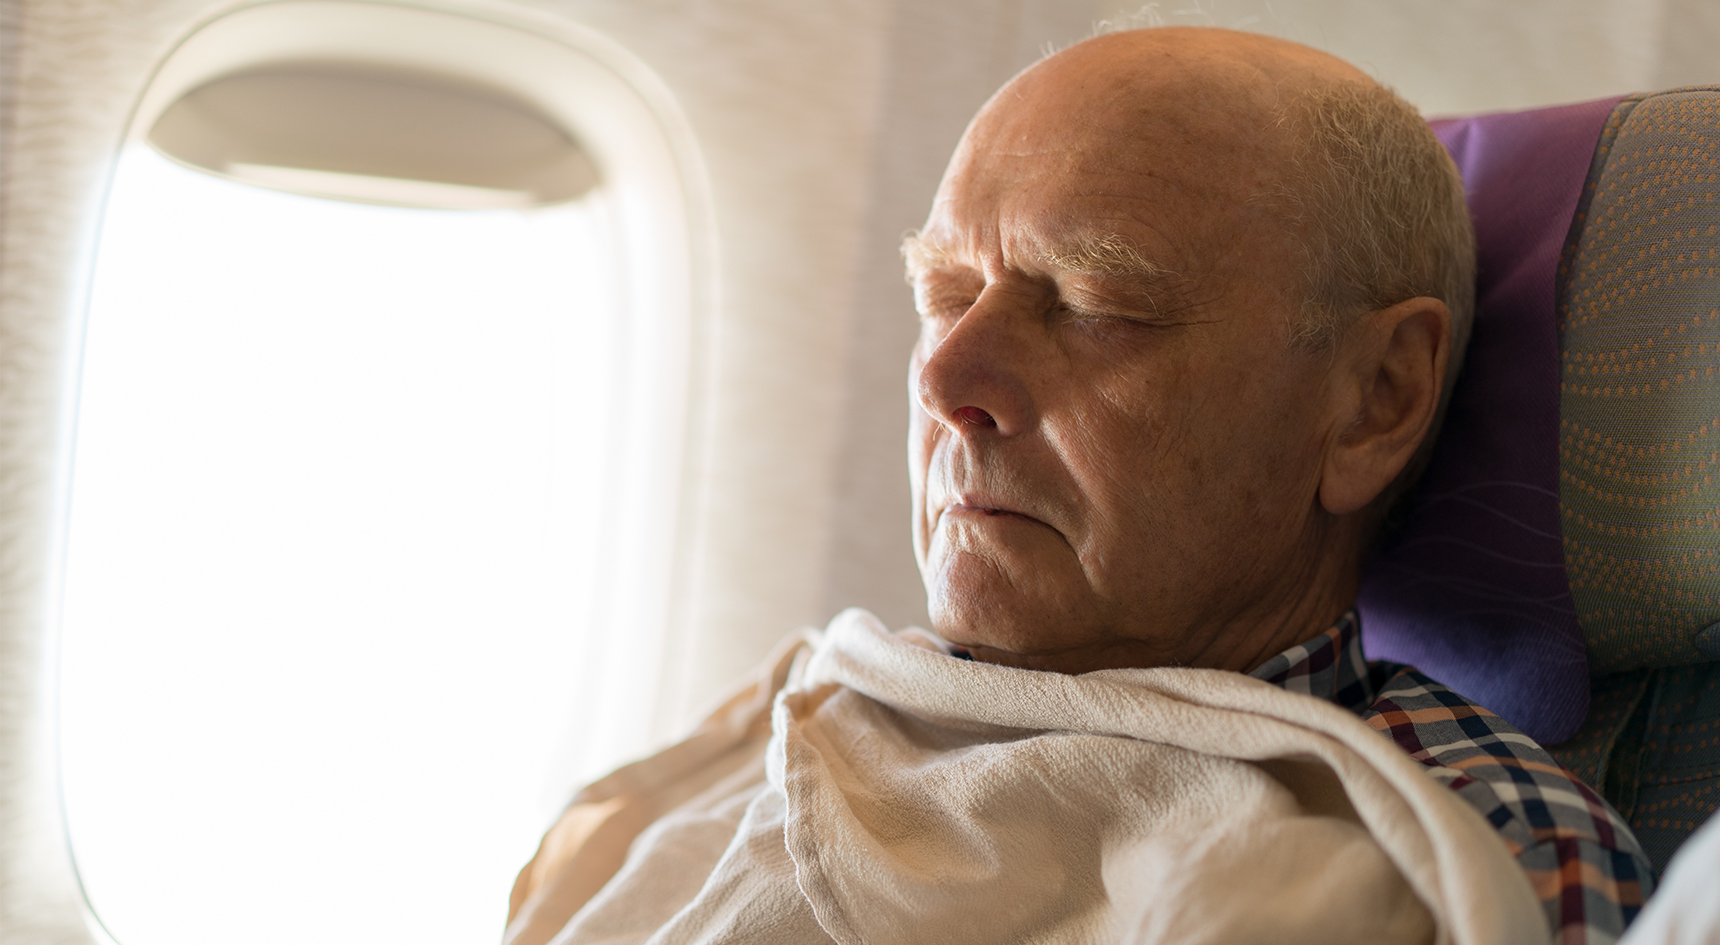 Man asleep on a plane covered in a blanket